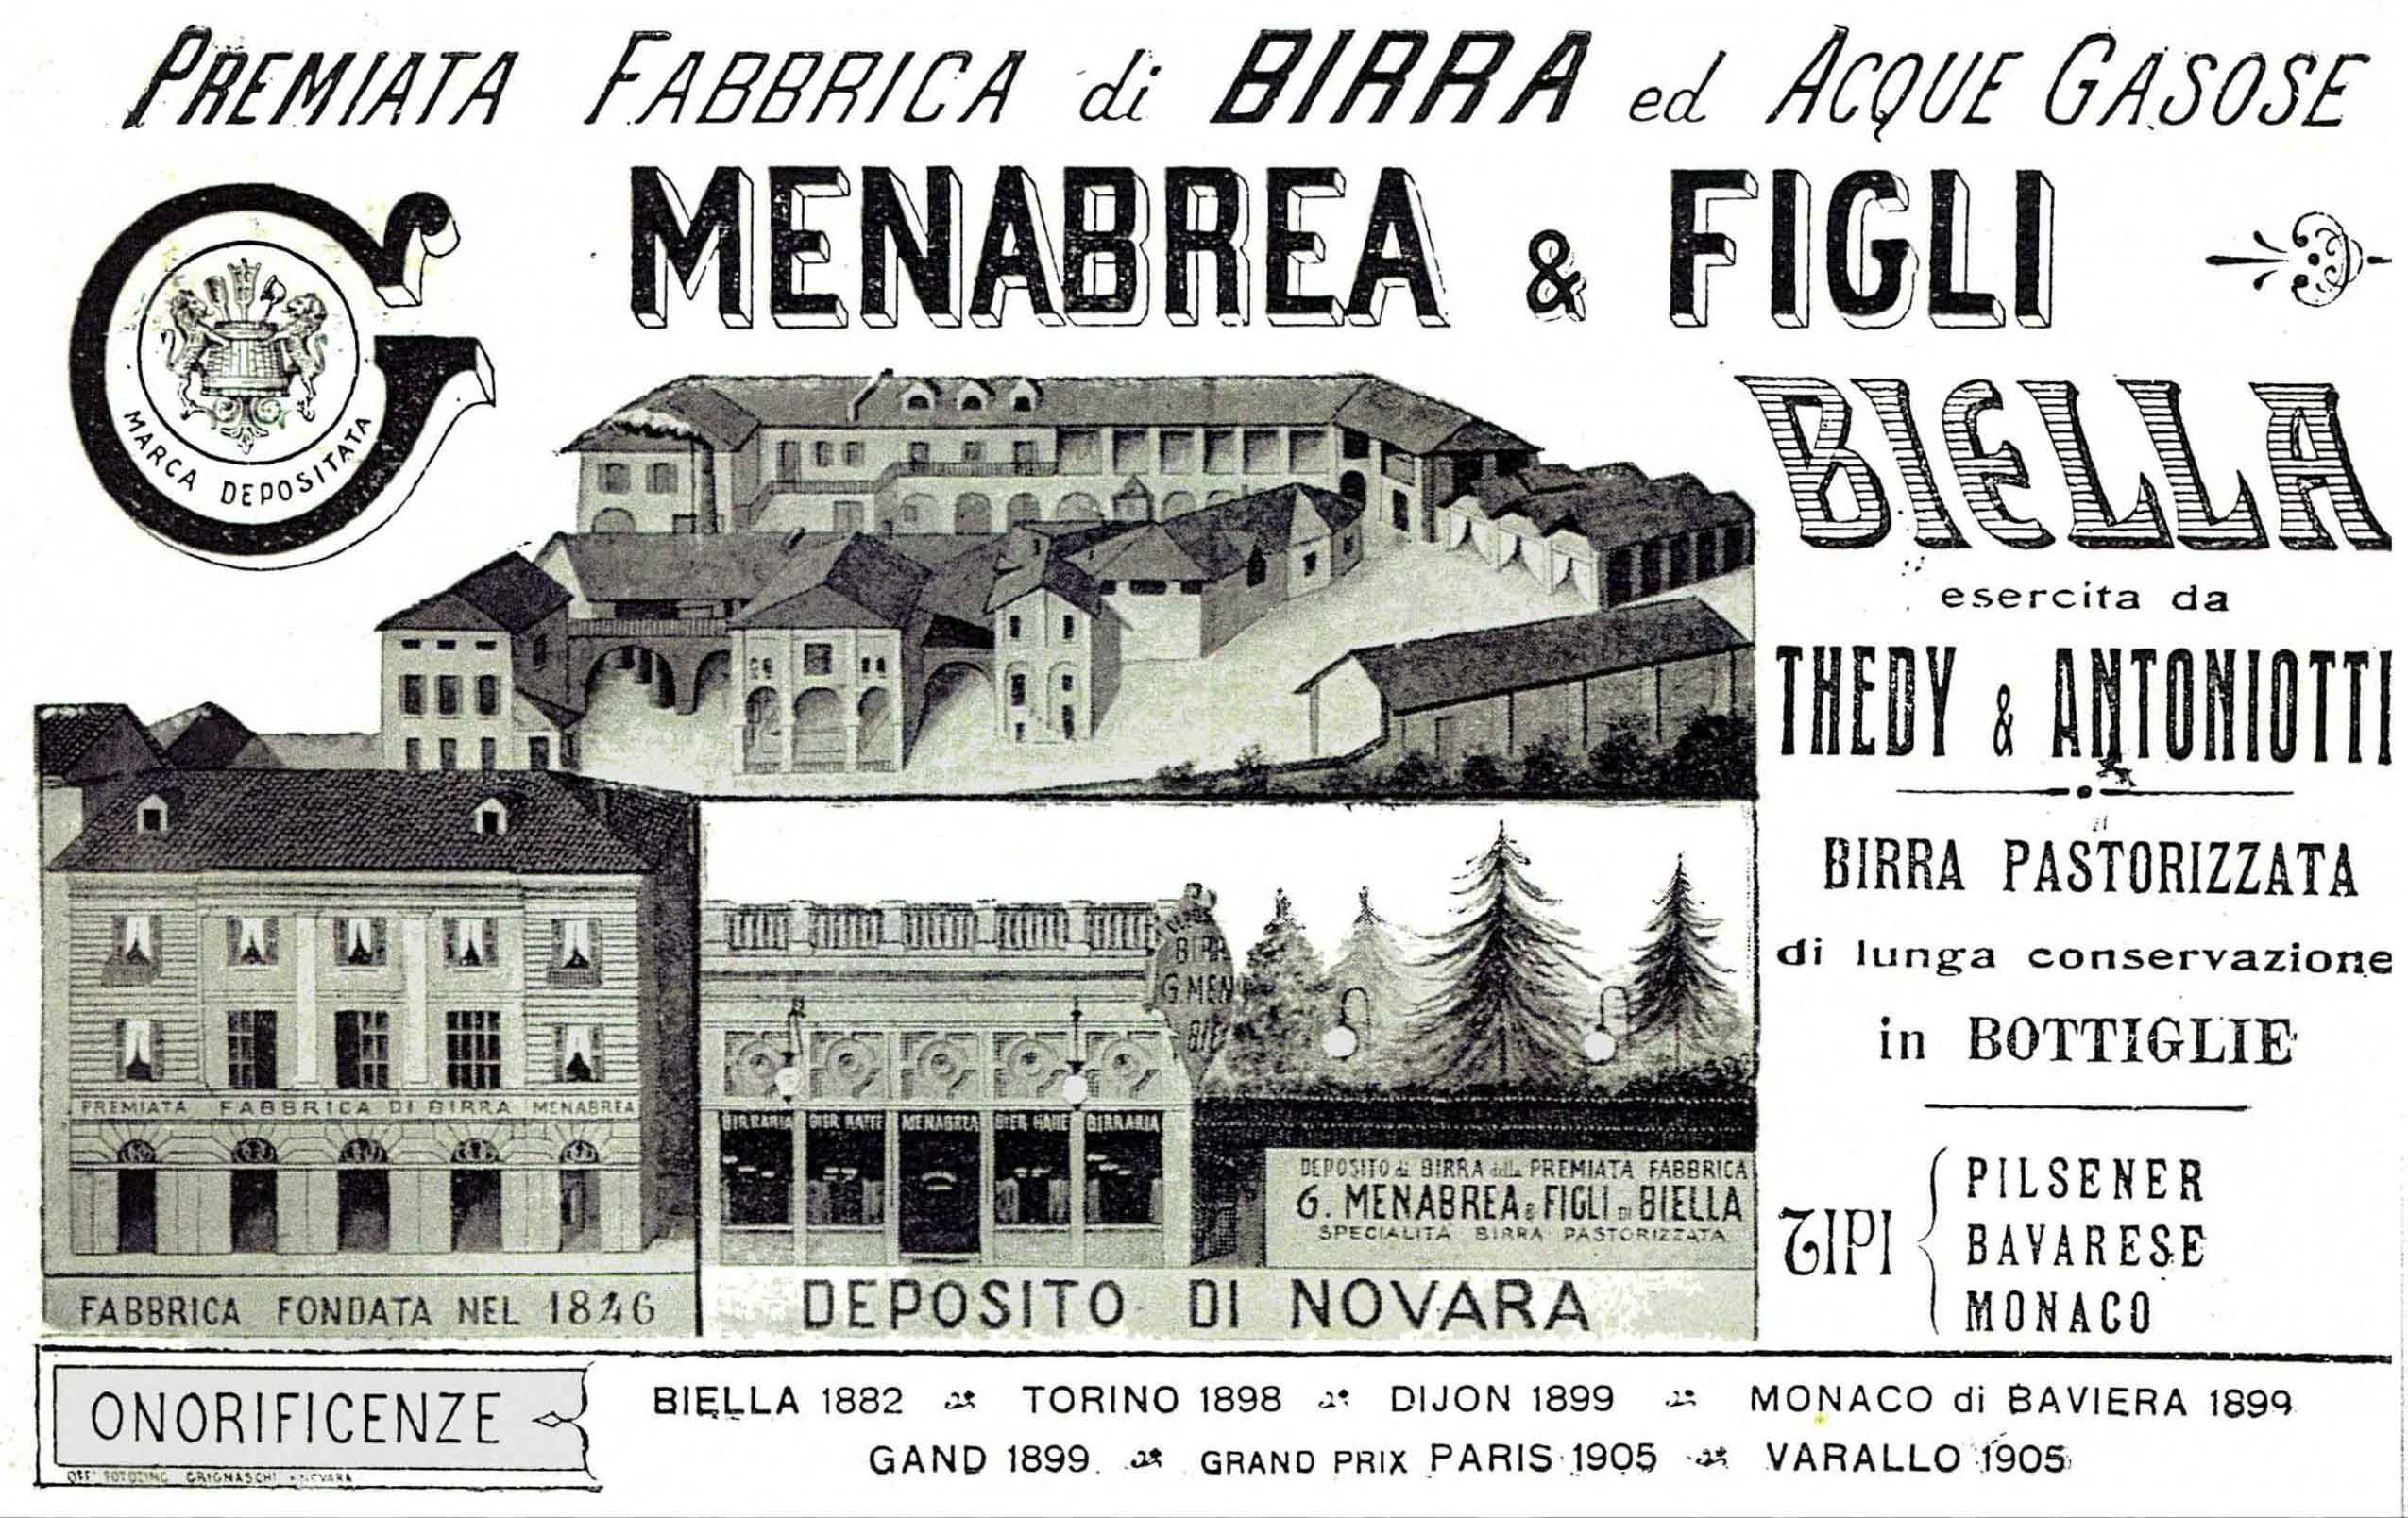 The Menabrea Brewery 1846 Historical Image 3